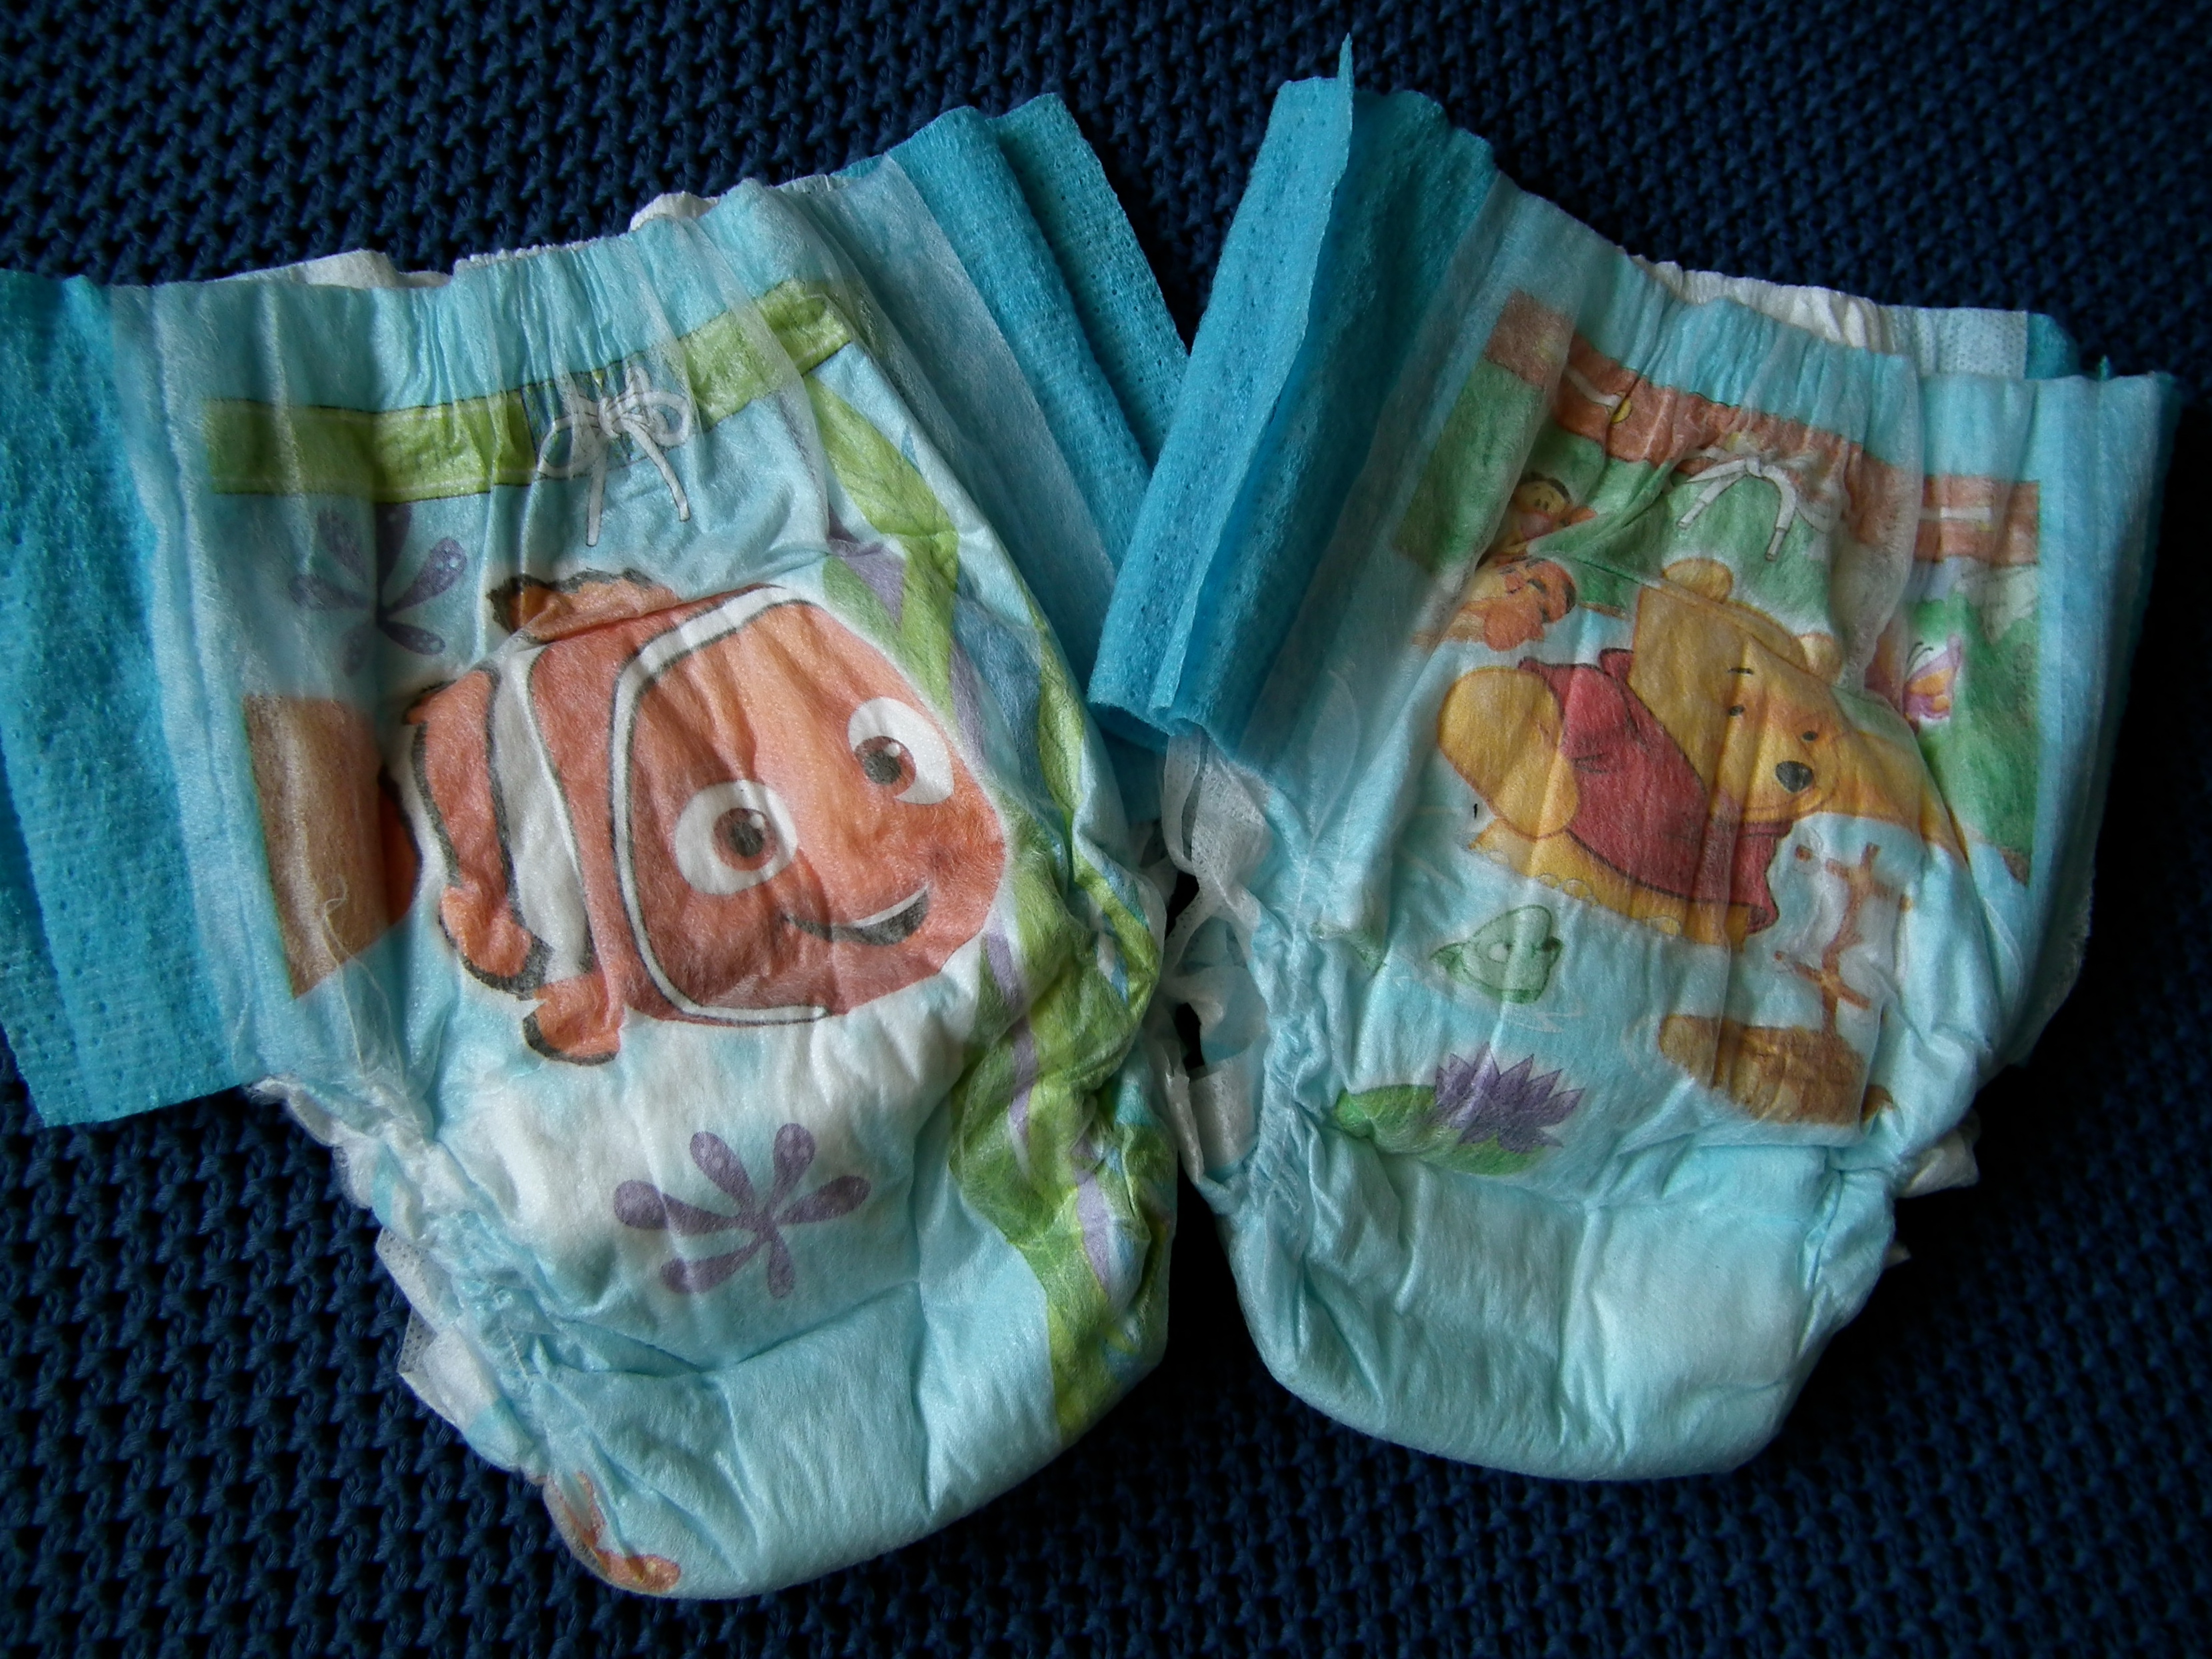 pampers premium protection 2 opinie